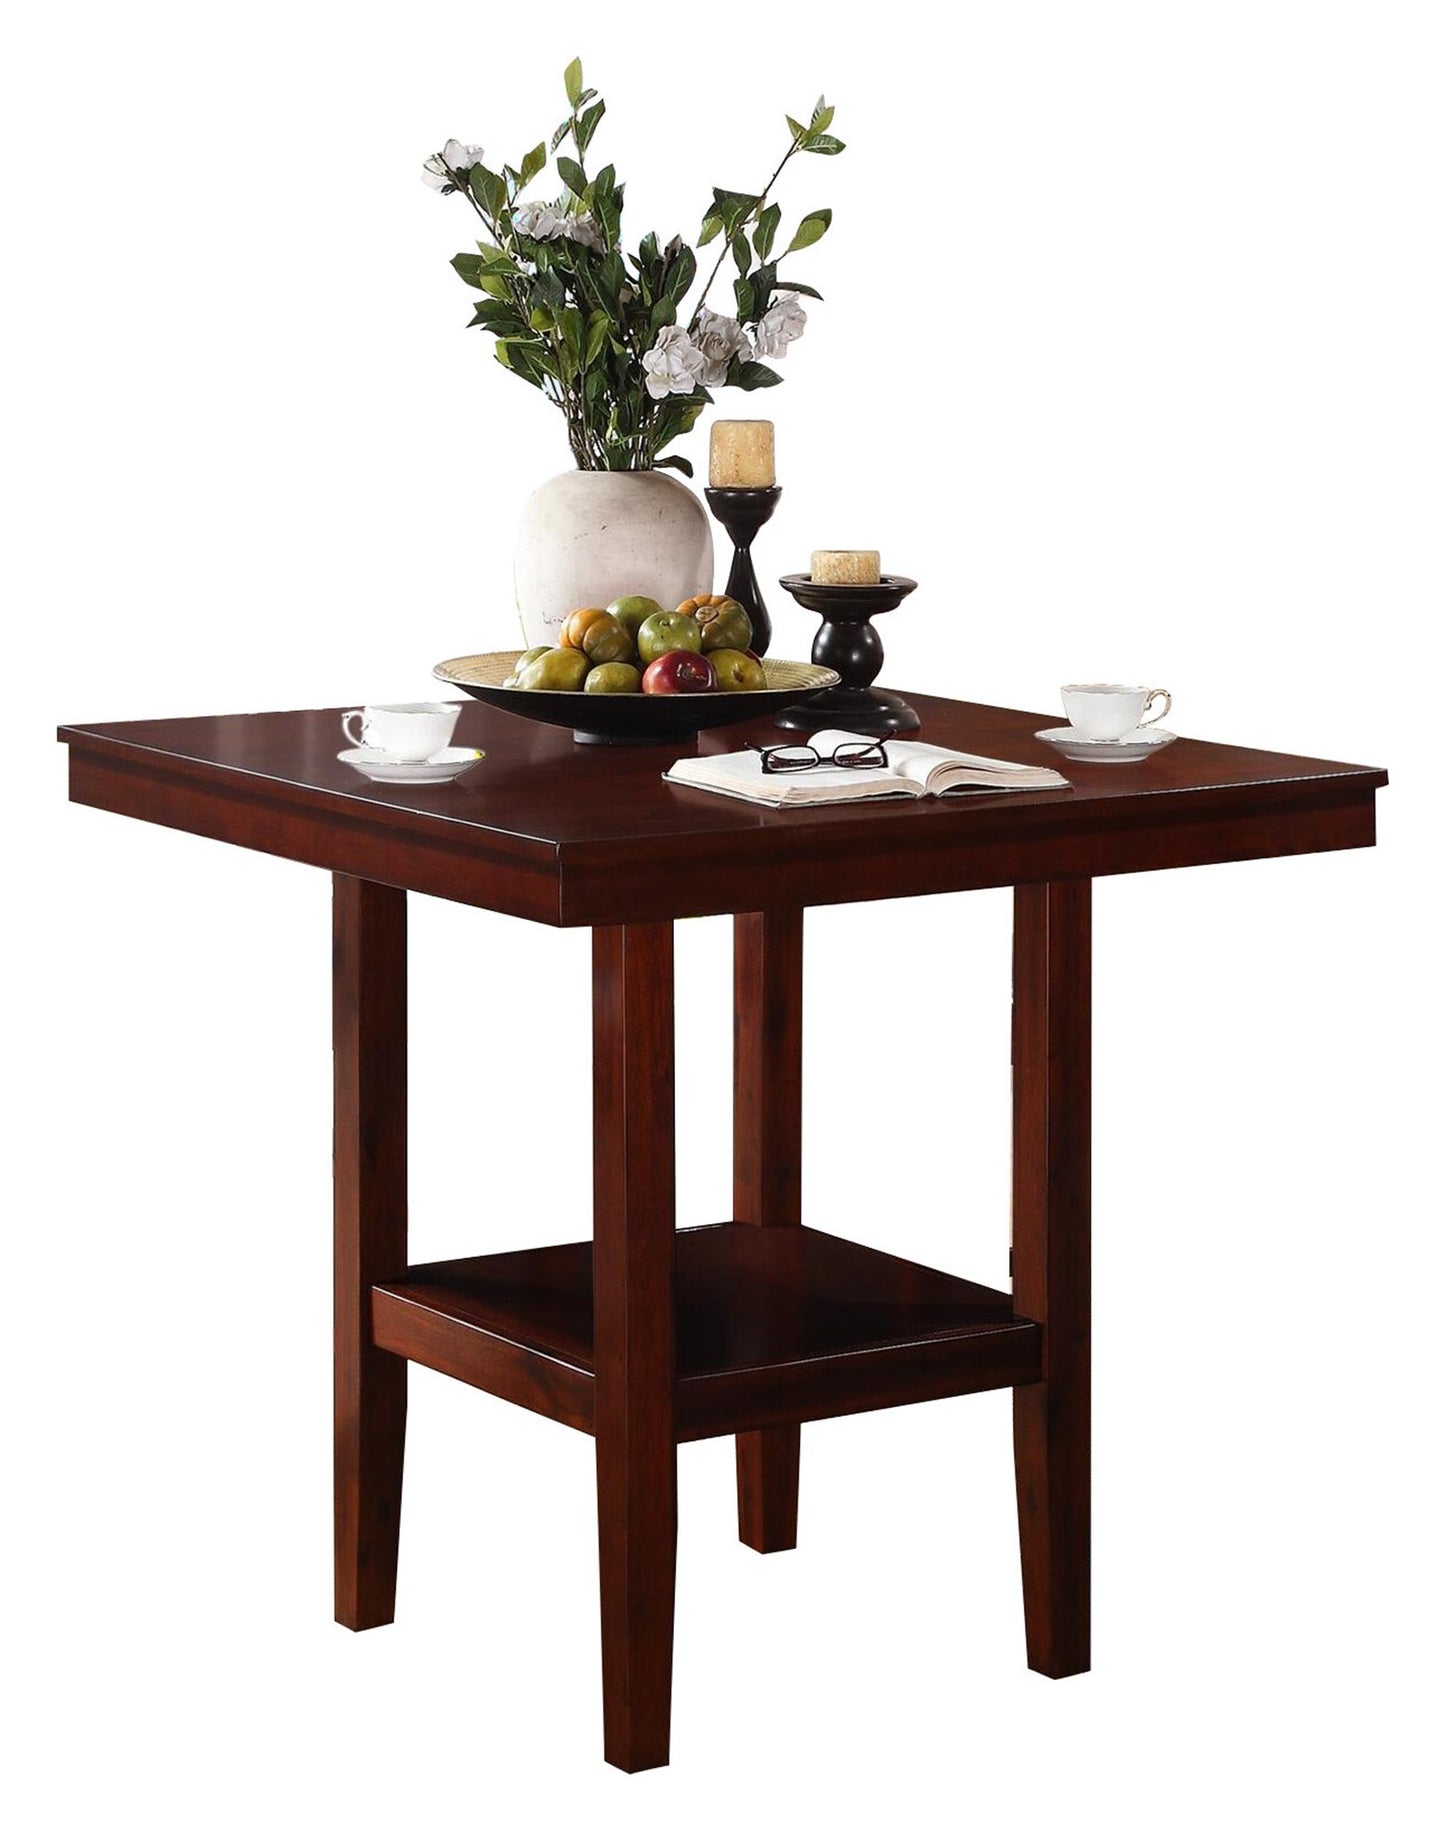 Homelegance Galena 5PC Counter Height Dining Set Table, 4 Chair in Dark Brown